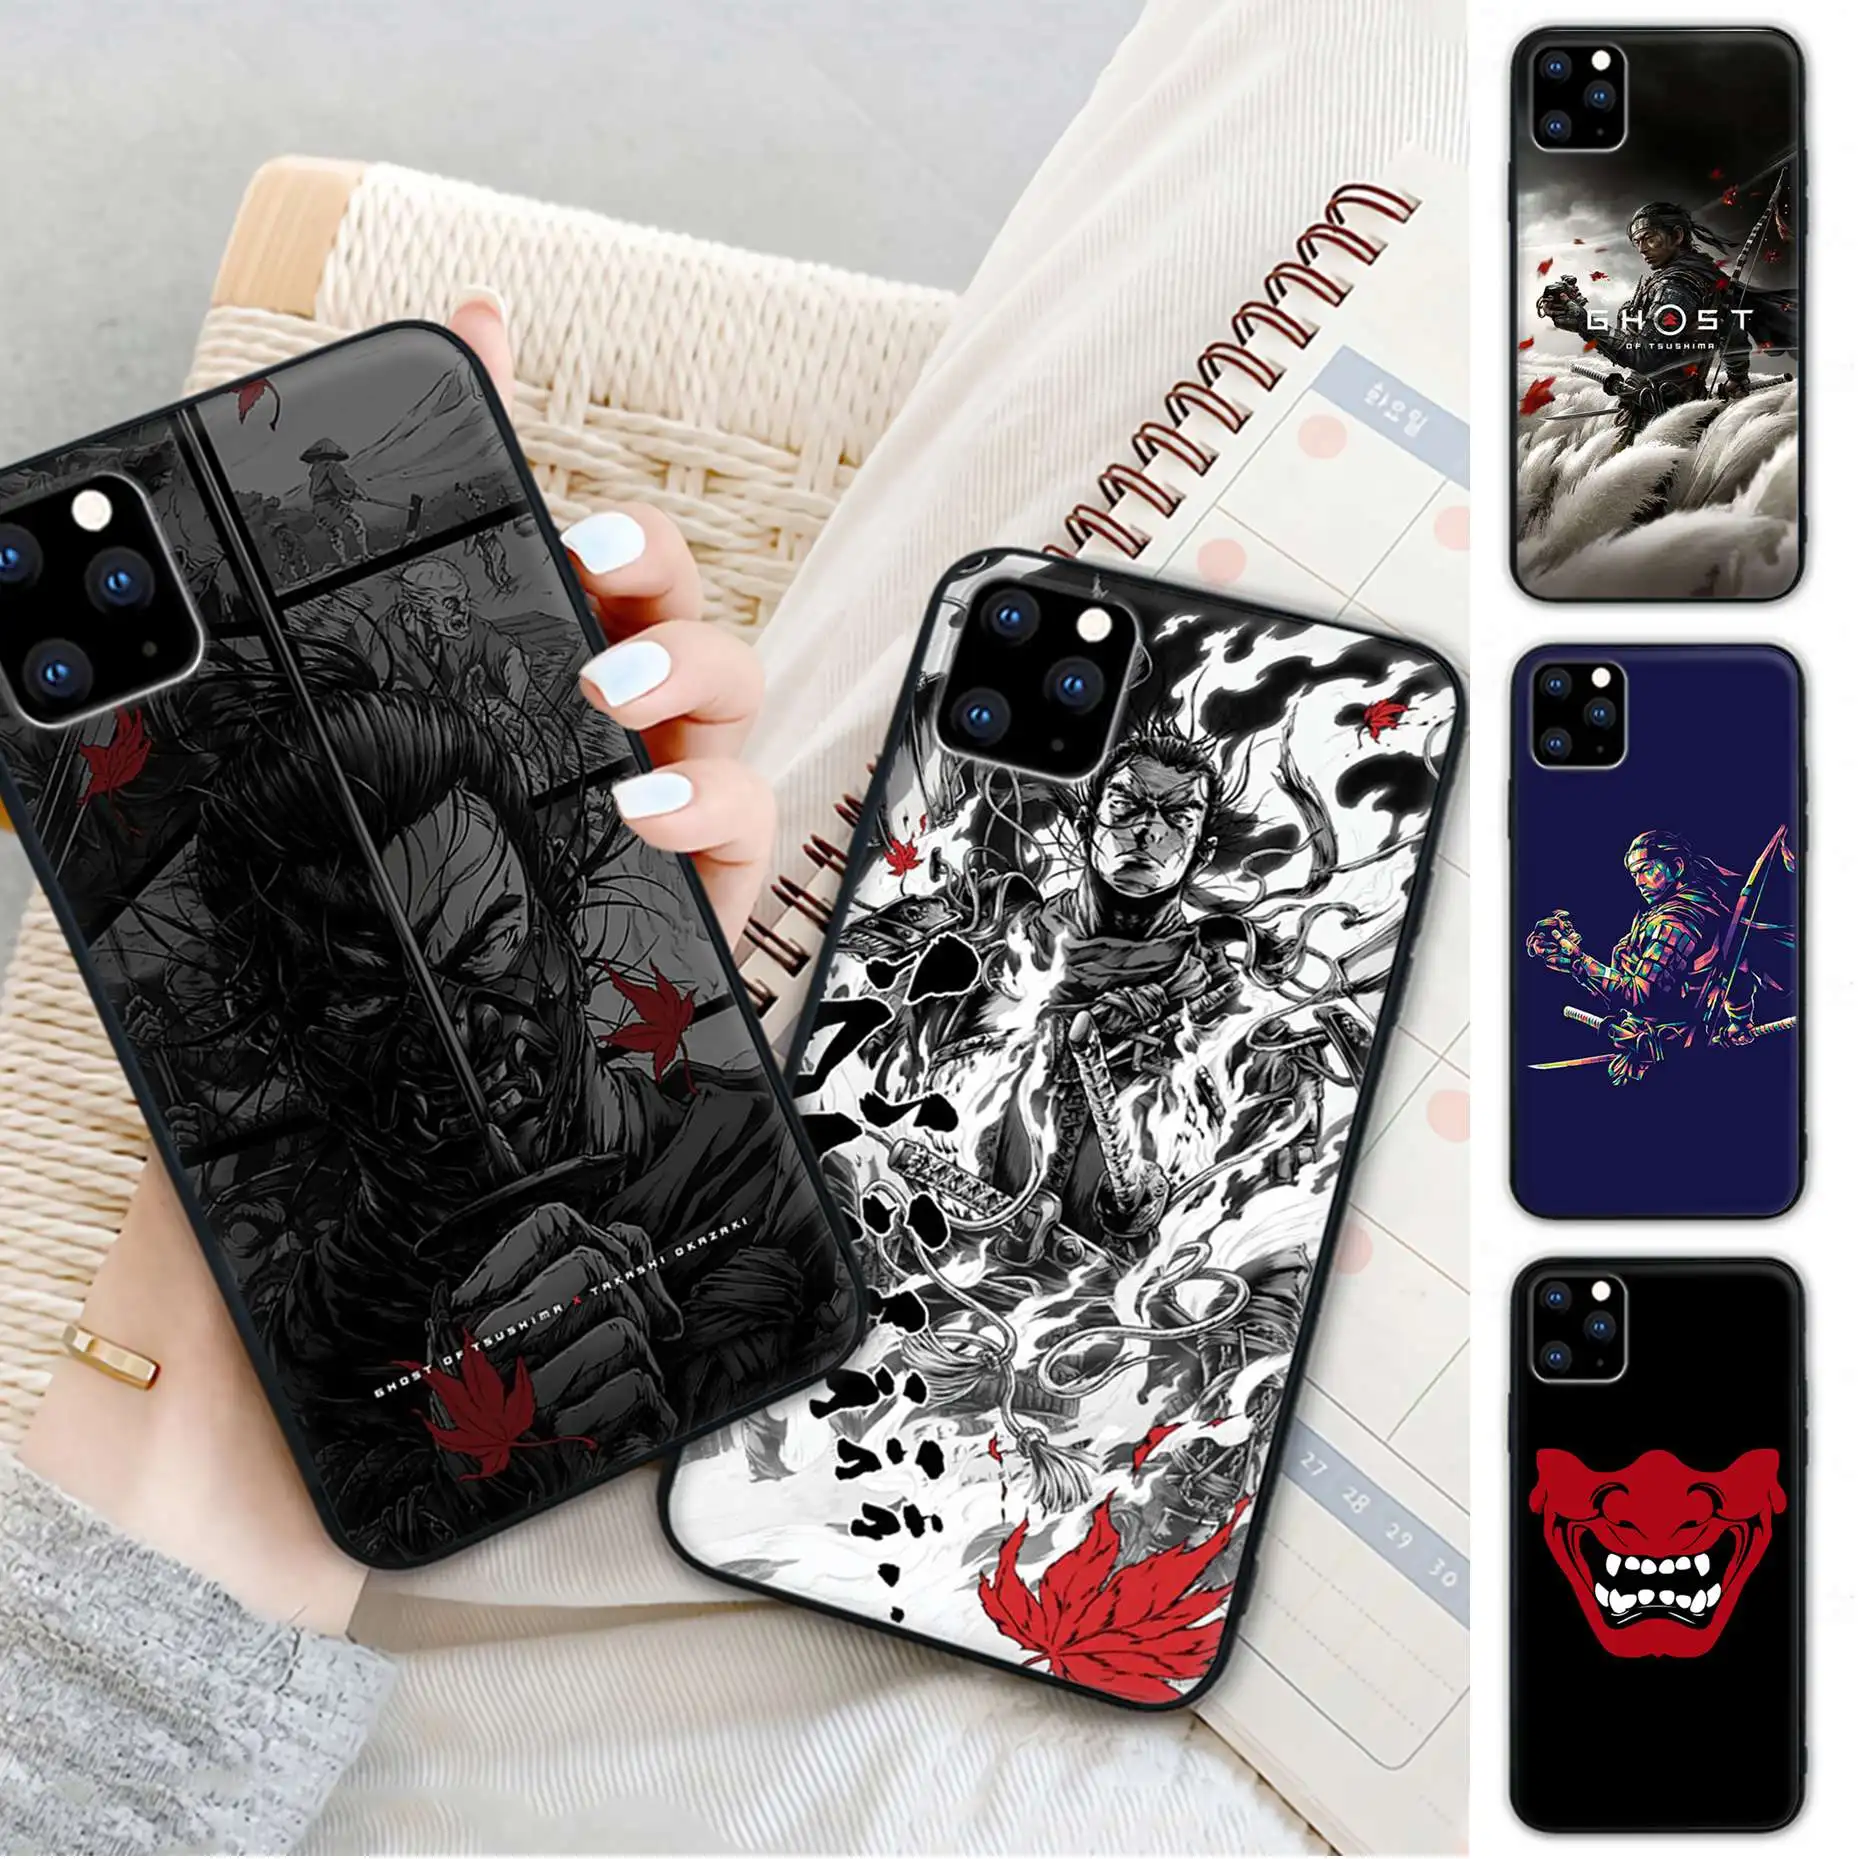 

Big Promotions Ghost Of Tsushima Mobile Phone Case For Samsung Galaxy M30S A01 A21 A31 A51 A71 A91 A10S A20S A30S A50S Cover